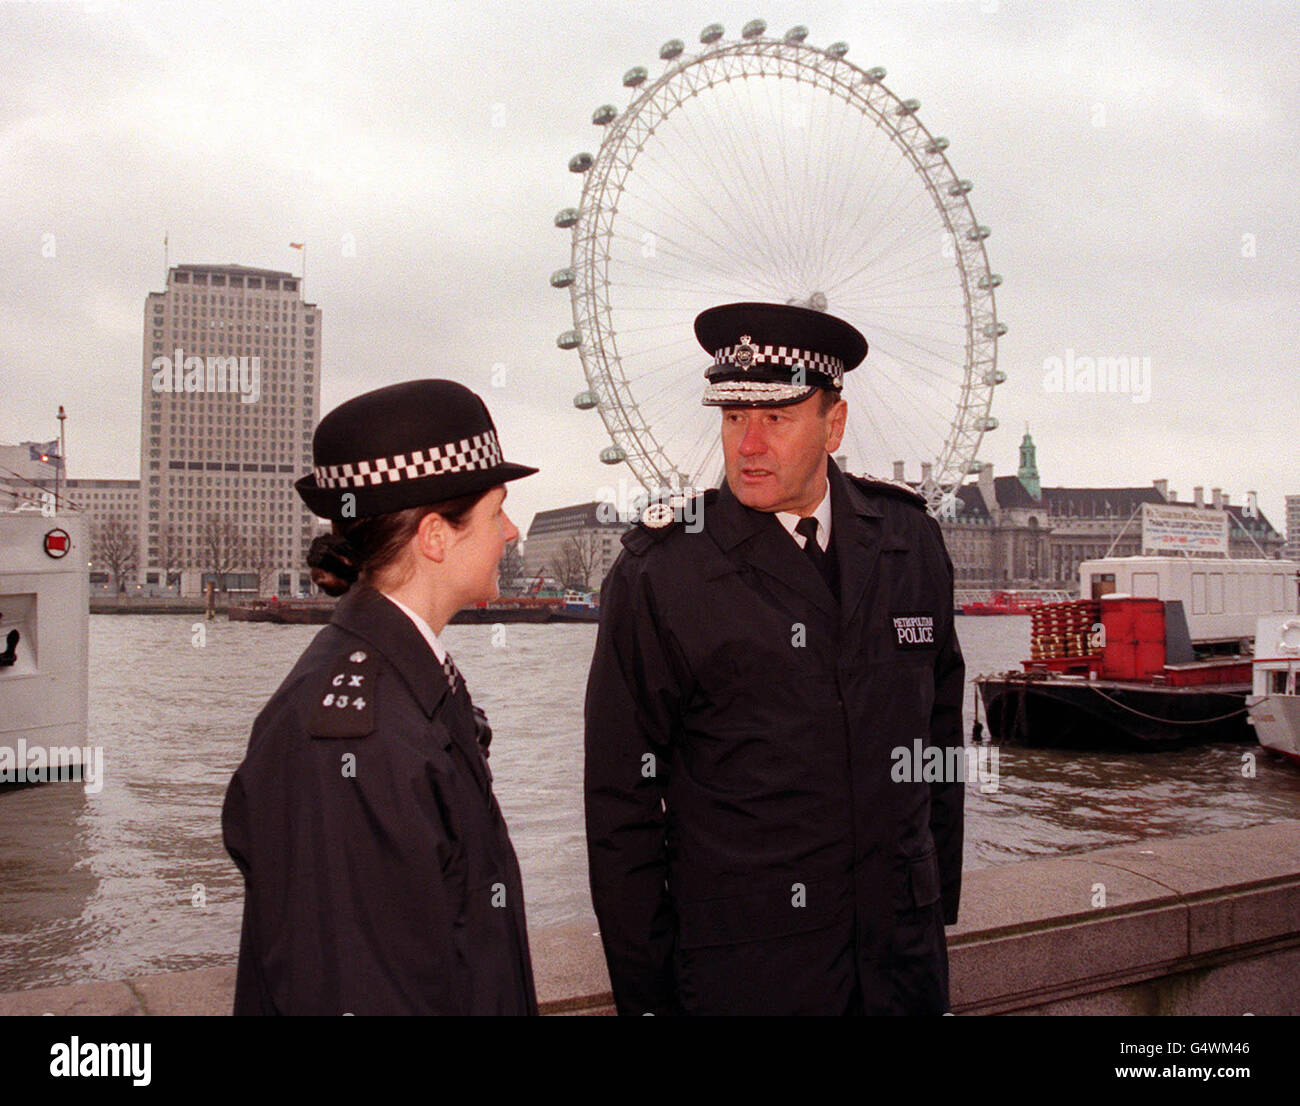 The new Commissioner of the Metropolitan Police, Sir John Stevens, talks to a female police officer, on his first day in charge of London's bobbies. Sir John has issued a 10-point police plan to cut crime and bureaucracy and pledged to make London a safer place. * He has also warned of a police recruitment crisis because of poor pay and the battering the force received over the bungled Stephen Lawrence murder investigation. Stock Photo